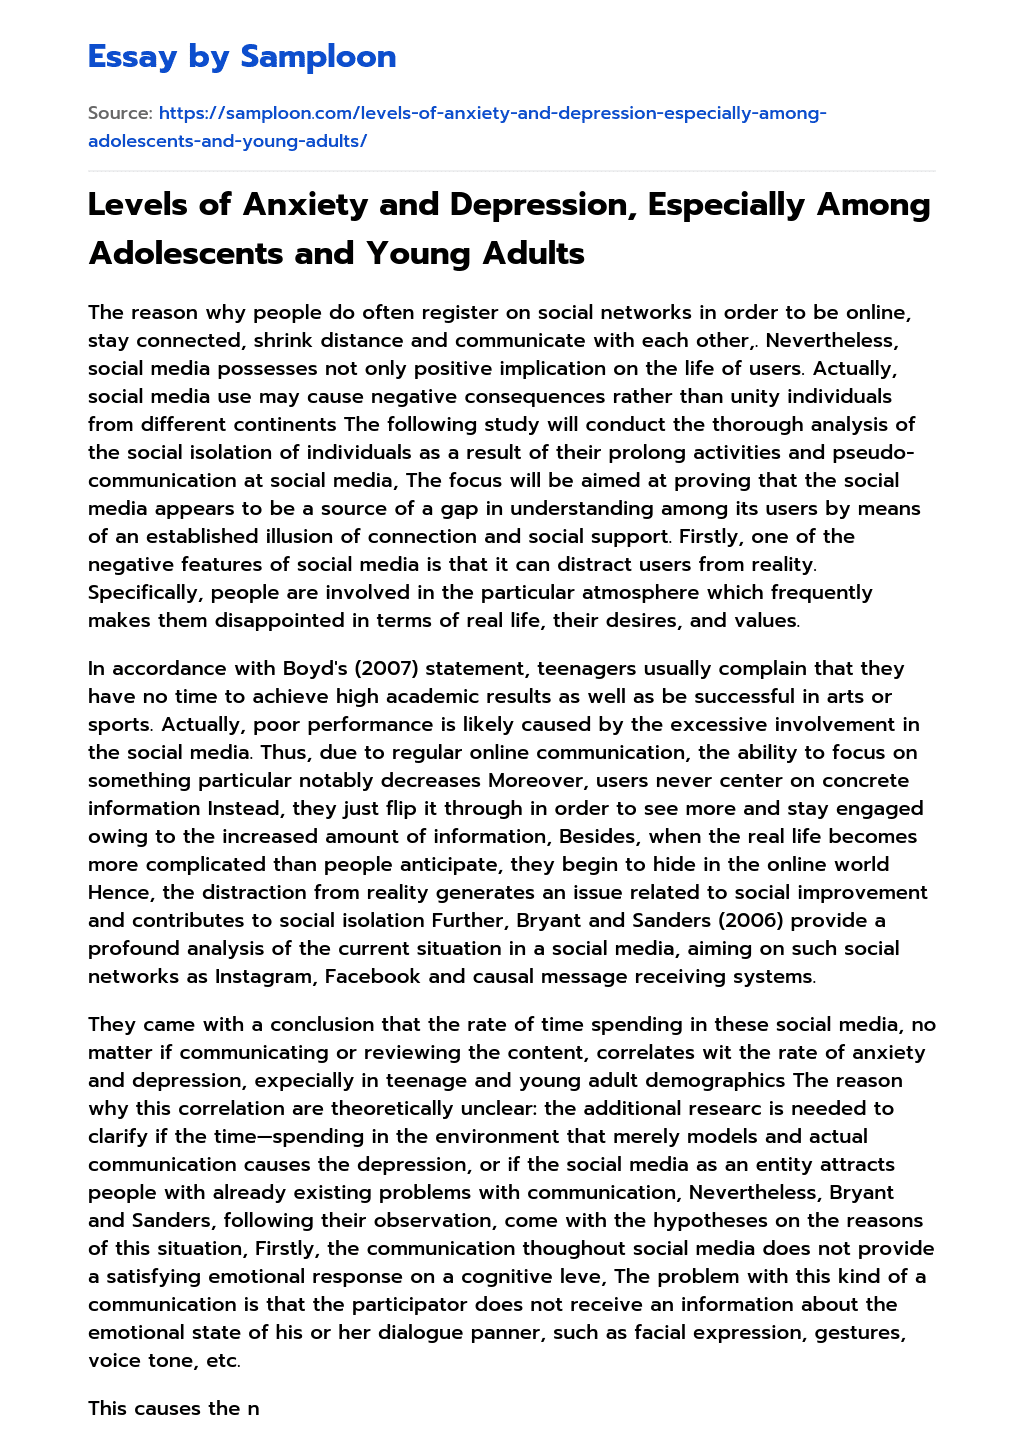 Levels of Anxiety and Depression, Especially Among Adolescents and Young Adults essay